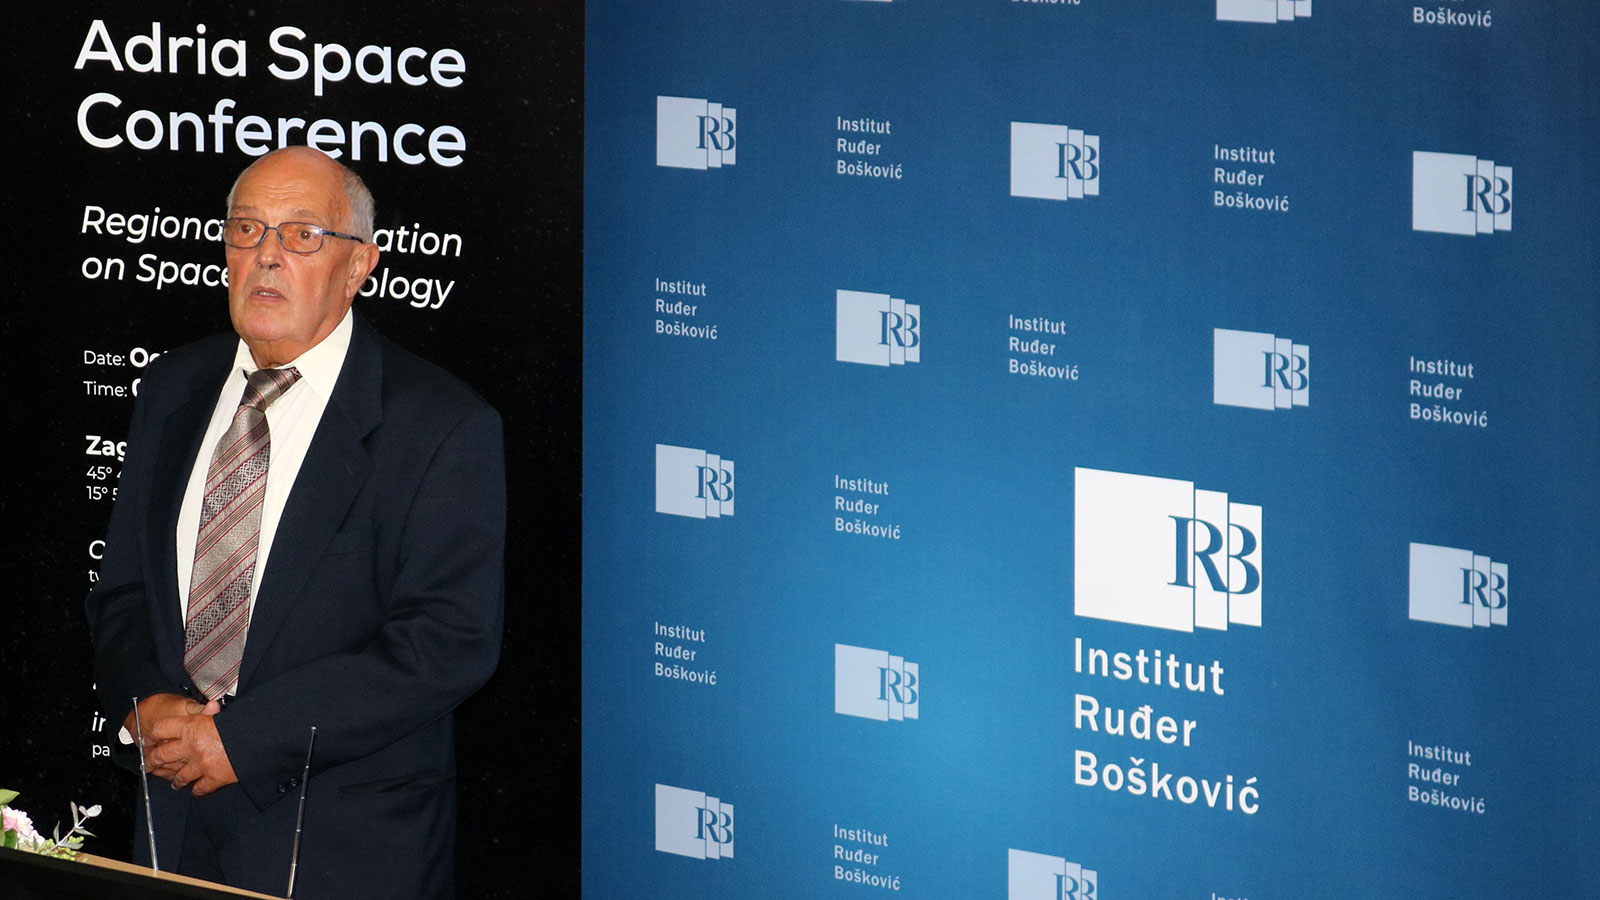 The RBI Hosts Regional Conference on Cooperation in Space Technologies